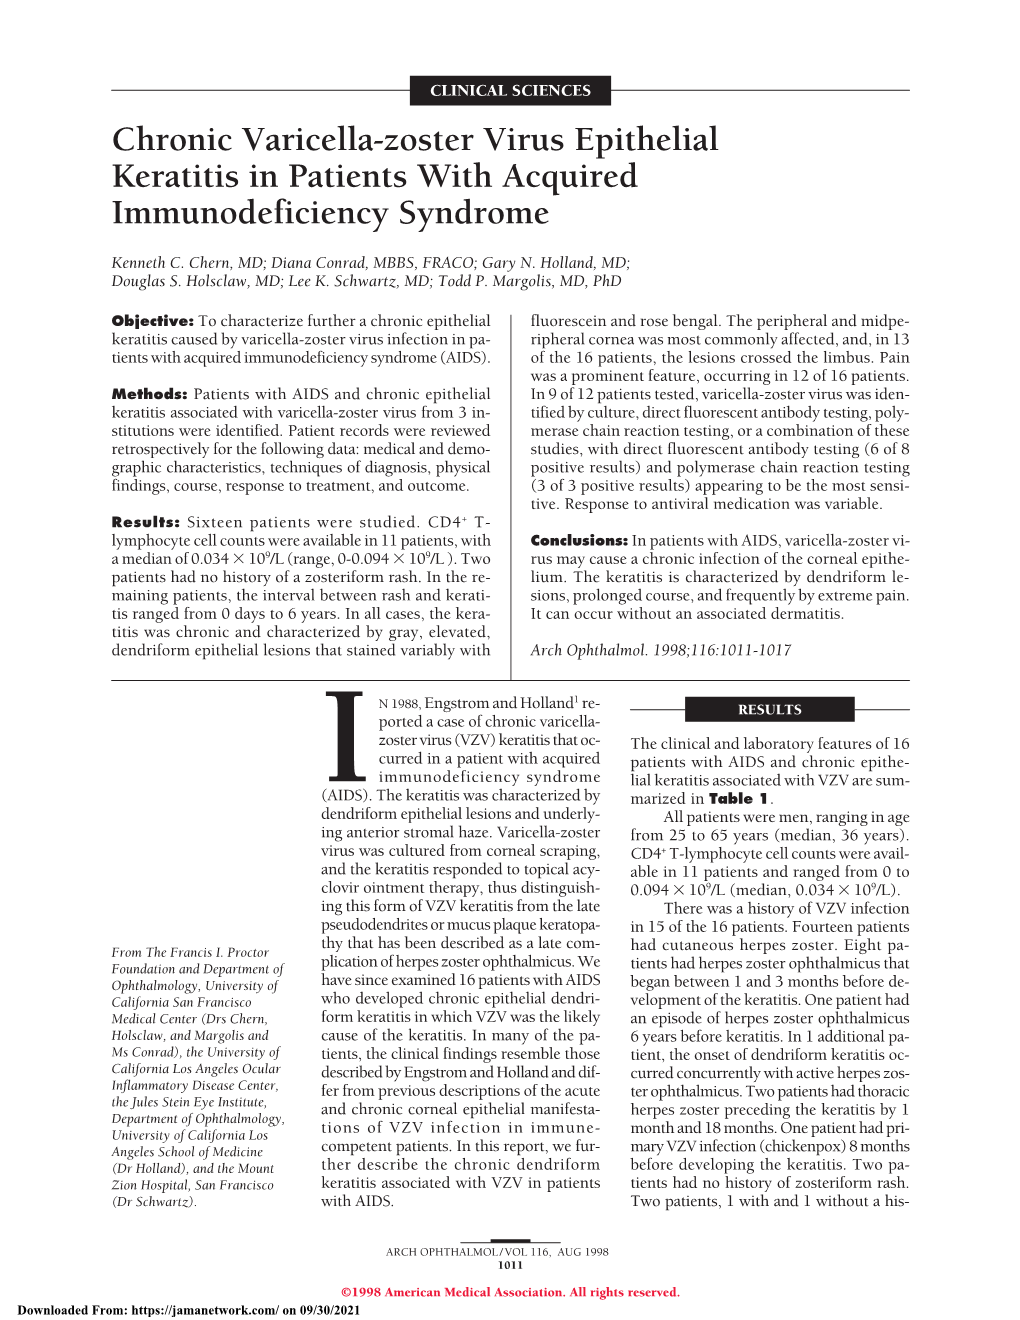 Chronic Varicella-Zoster Virus Epithelial Keratitis in Patients with Acquired Immunodeficiency Syndrome